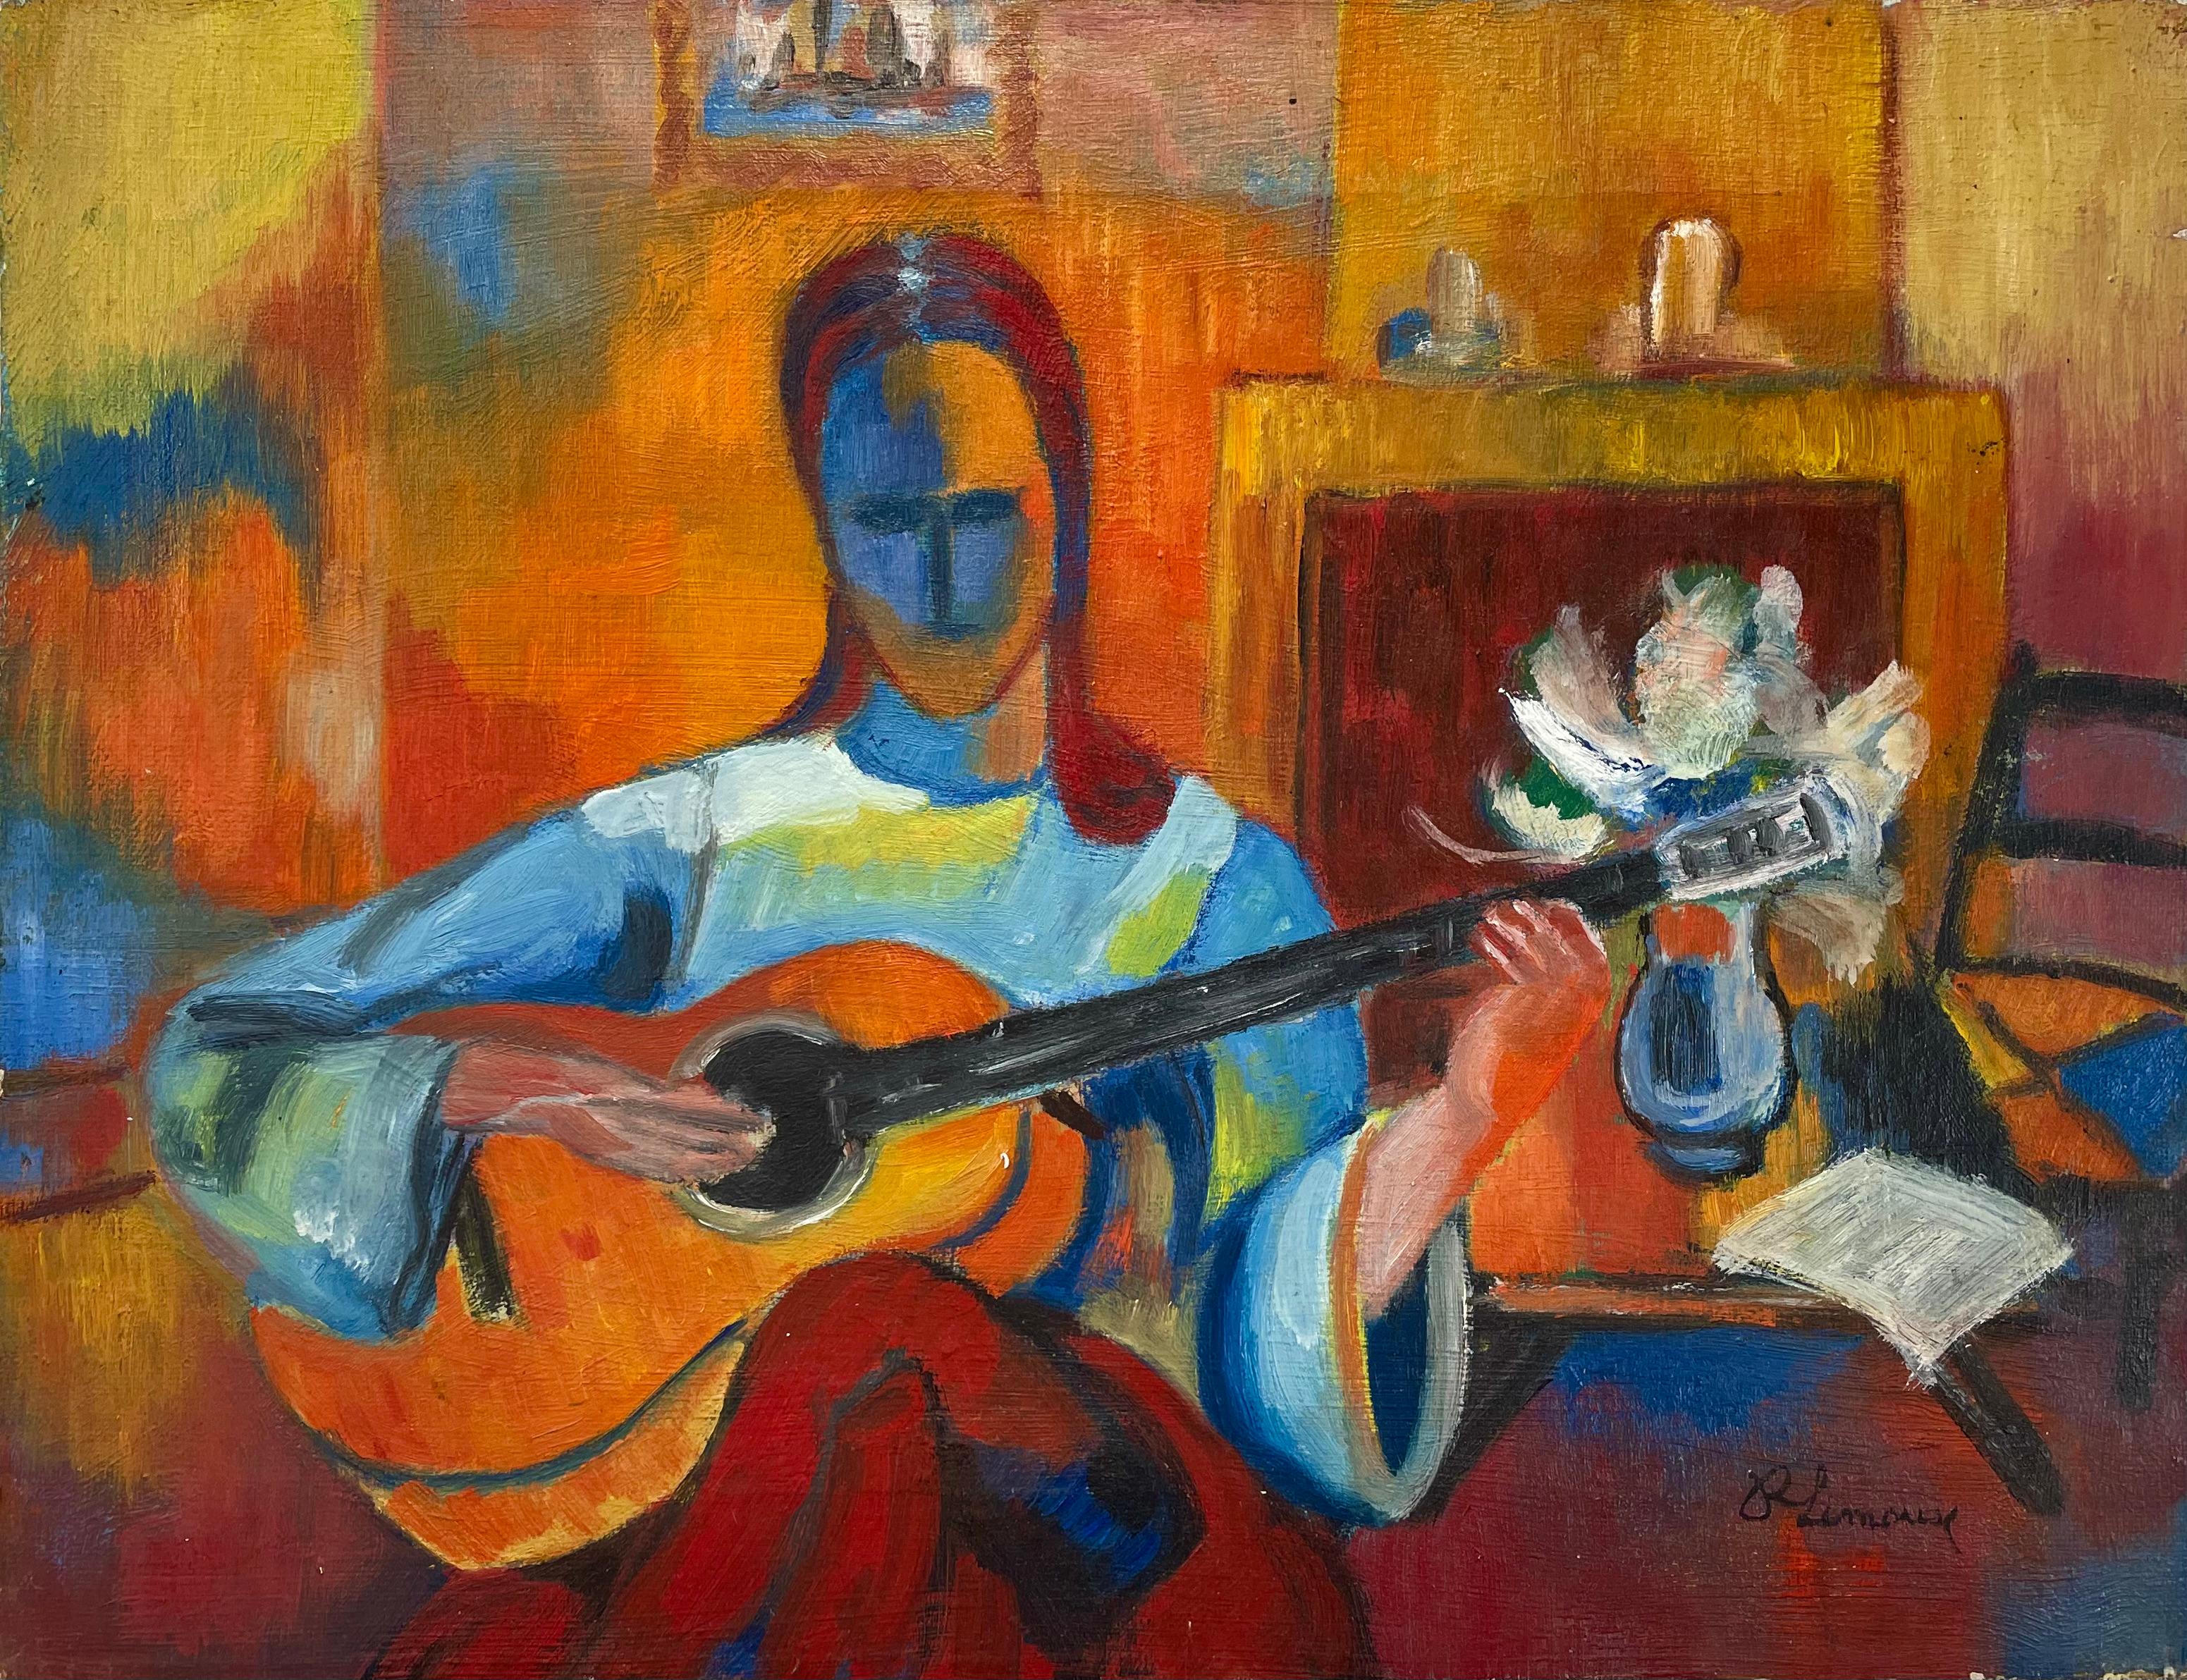 Guitar Player - Painting by Roger Marcel Limouse